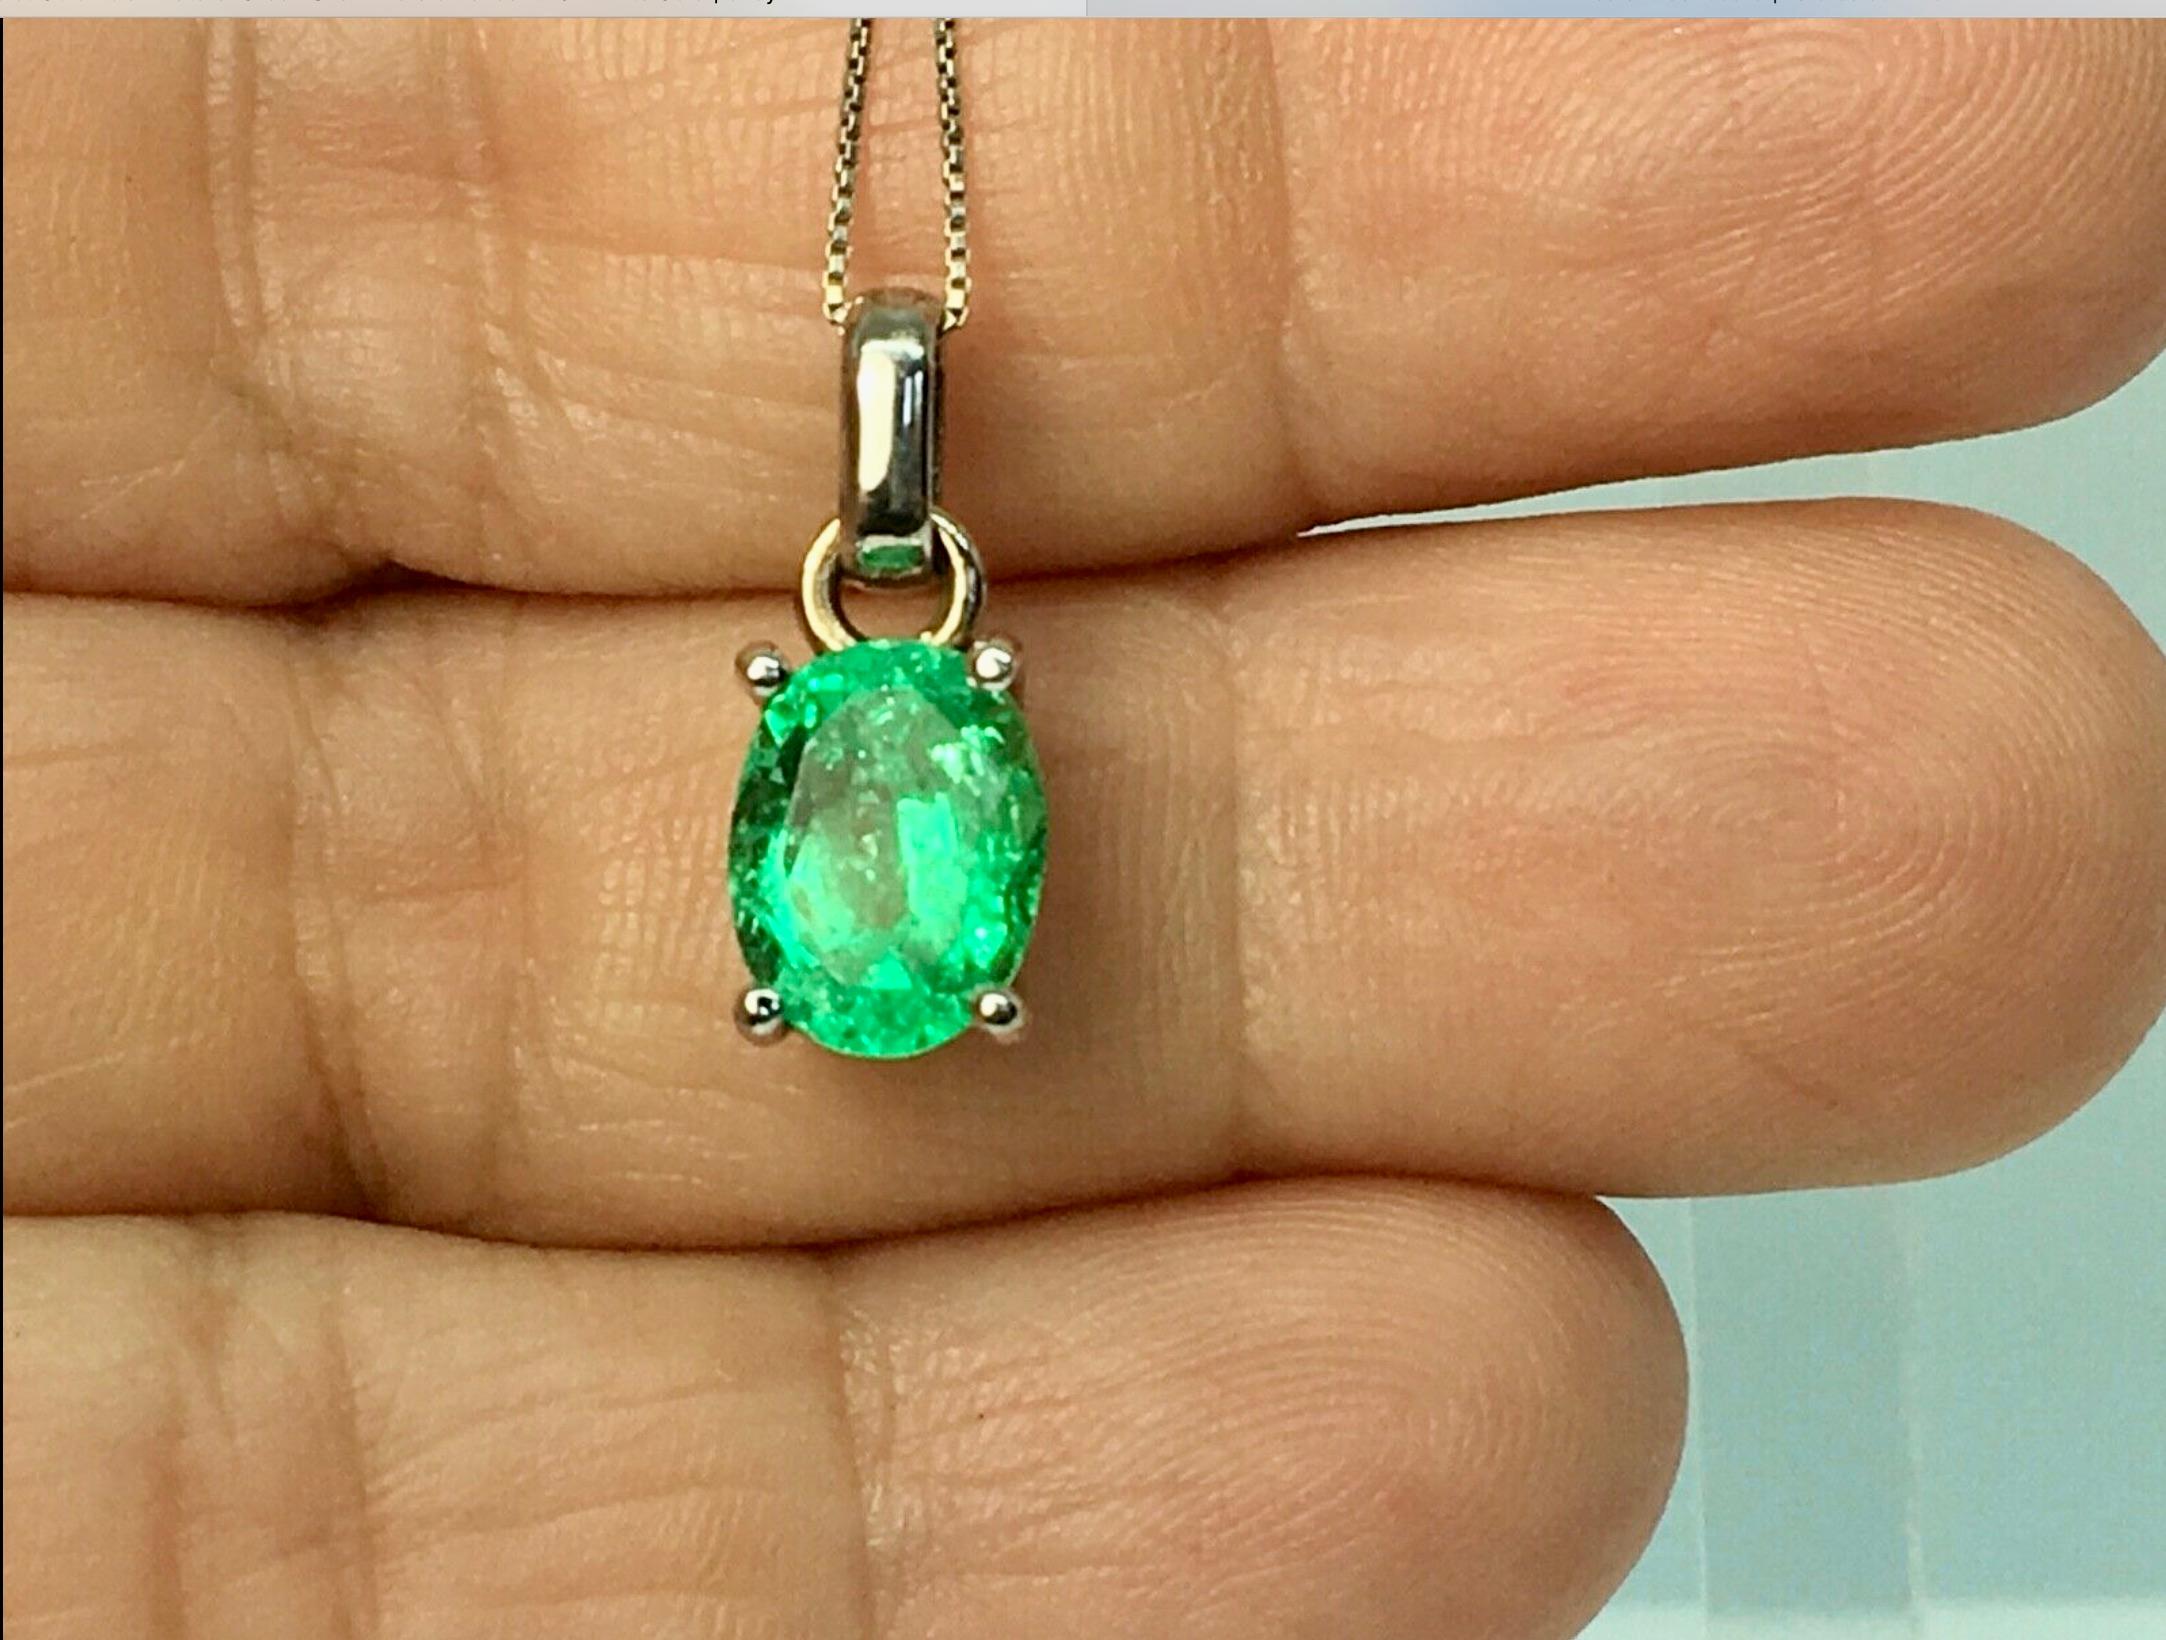 Solitaire pendant with a fine natural Colombian emerald oval cut, weigh apprrox. 1.85 carat, measurements; 9.53mmx7.45mm. Medium Green, VS in clarity. Excellent clarity and transparency! 
Composition: Solid White Gold 18K  
Style: Solitaire -